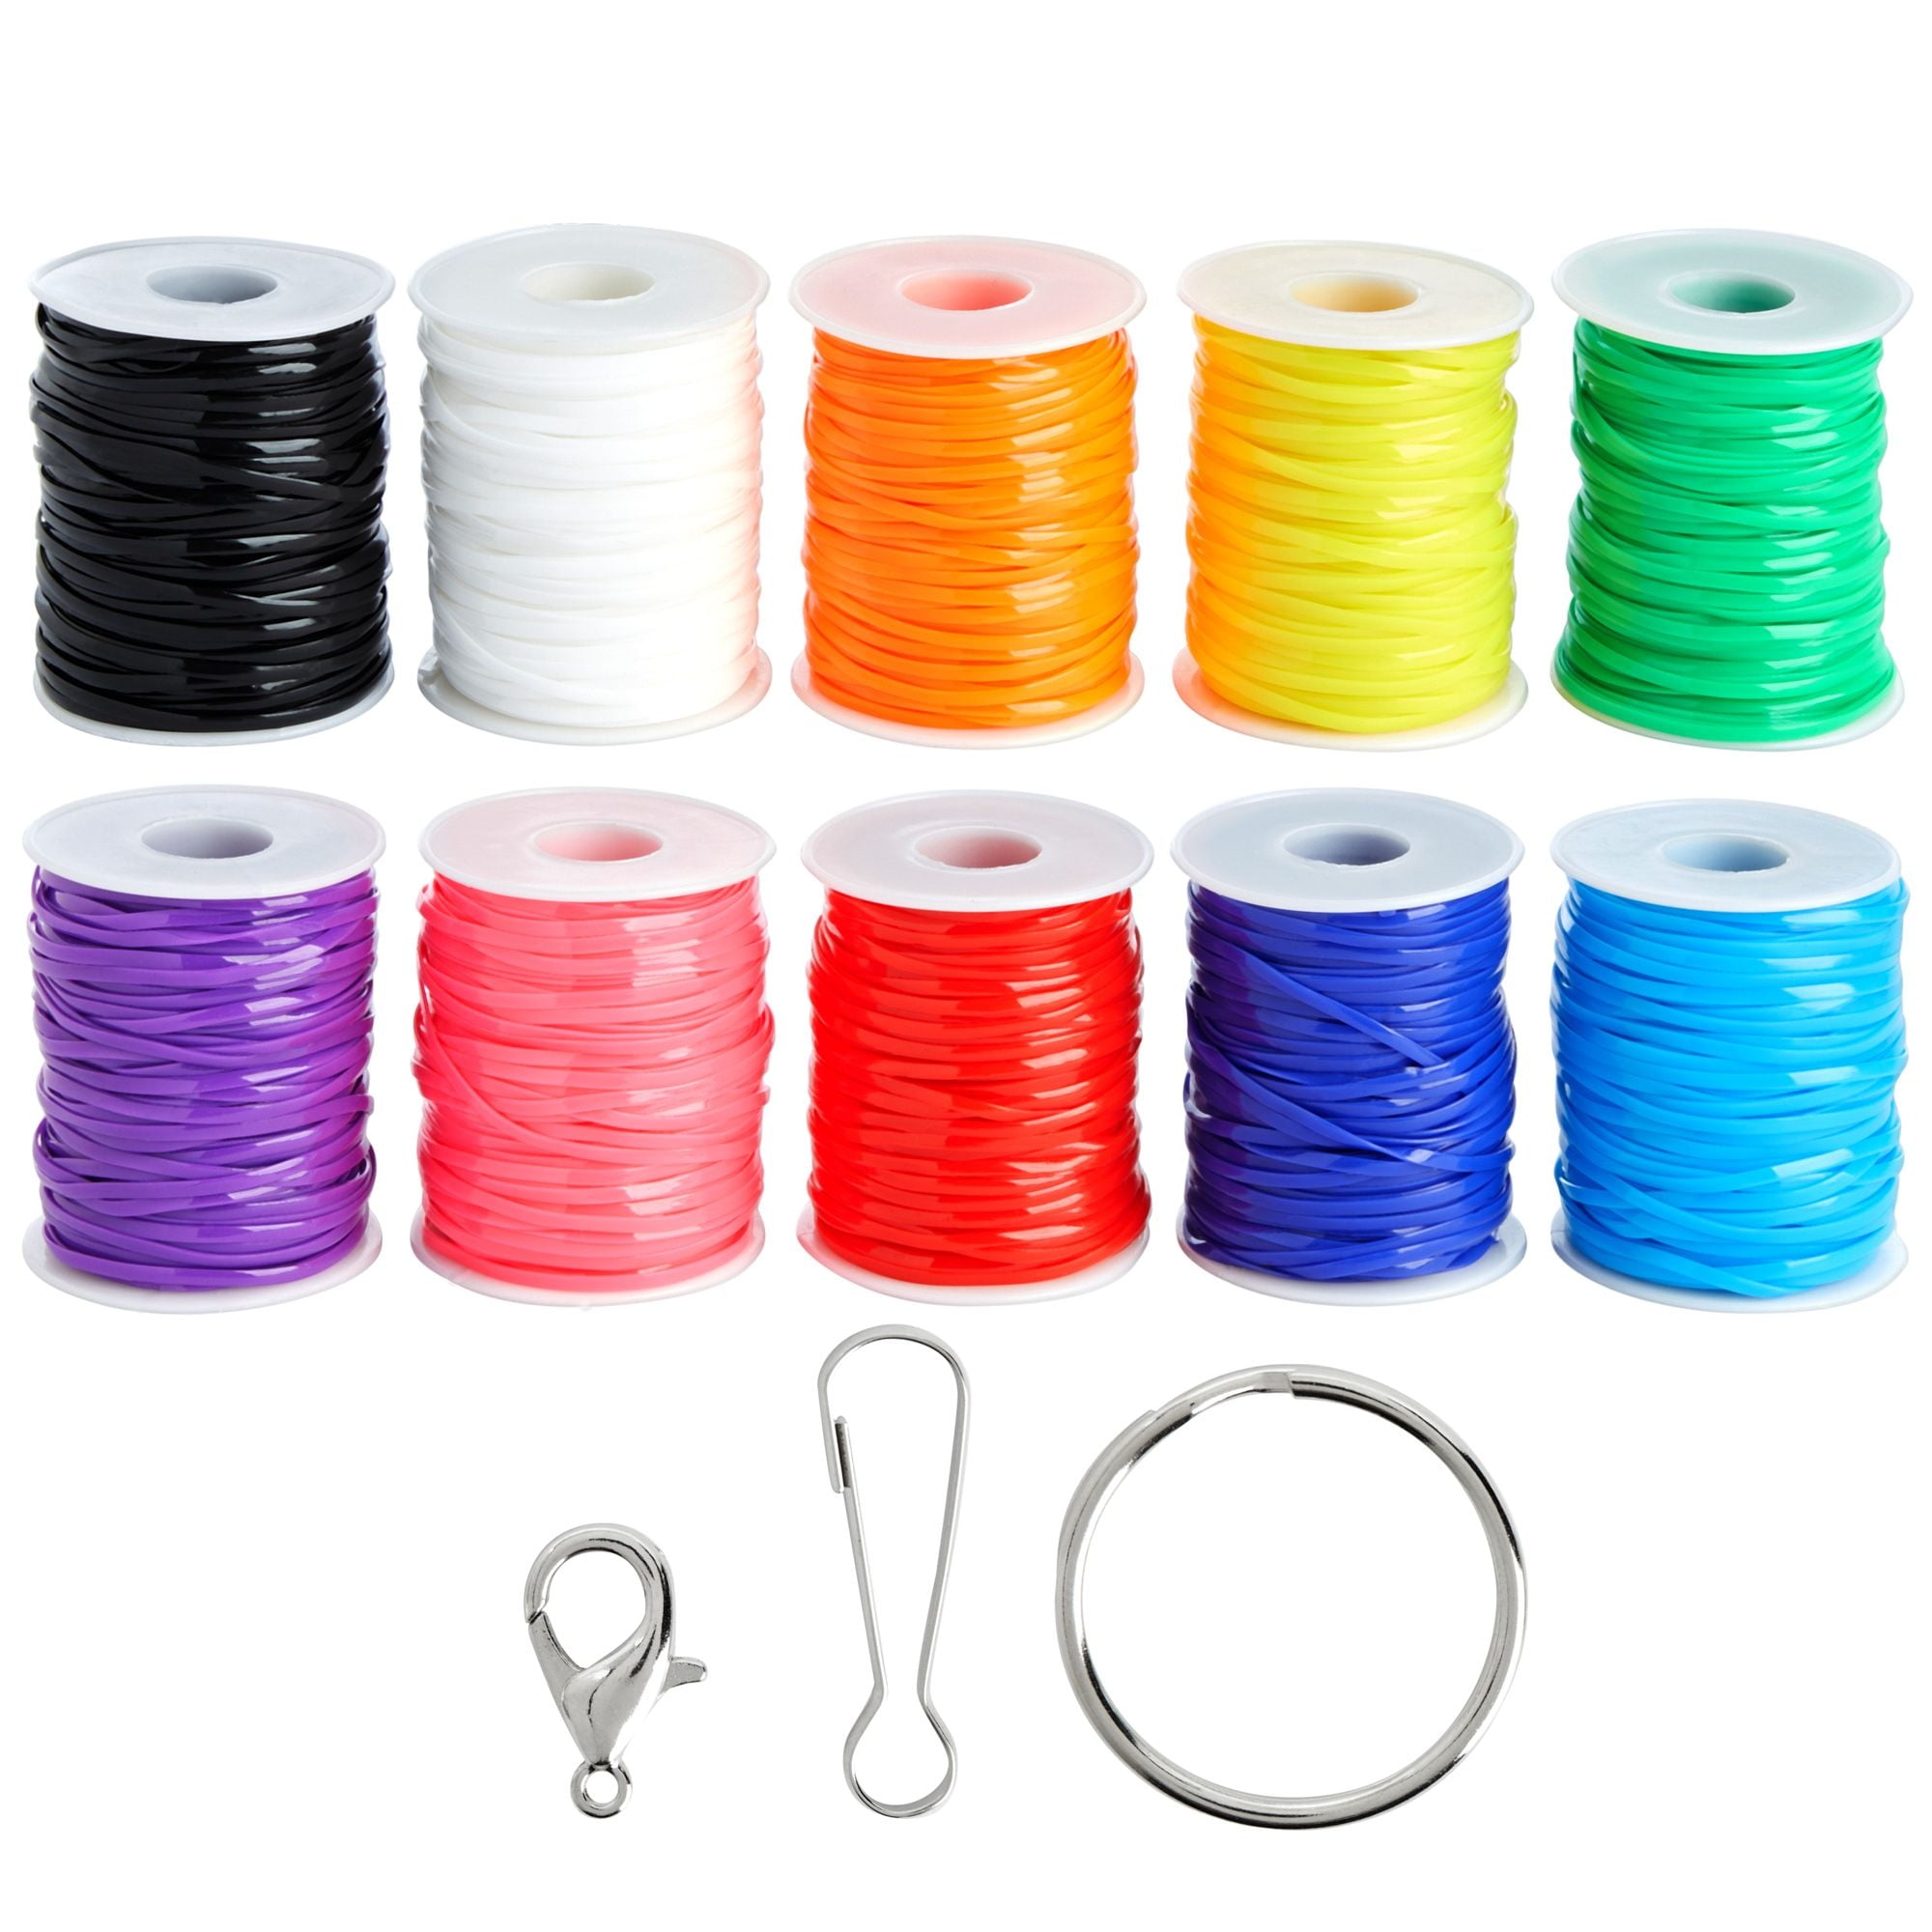 31 Colors Lanyard String Boondoggle Kit for 15 Keychains, Plastic Lacing Cord